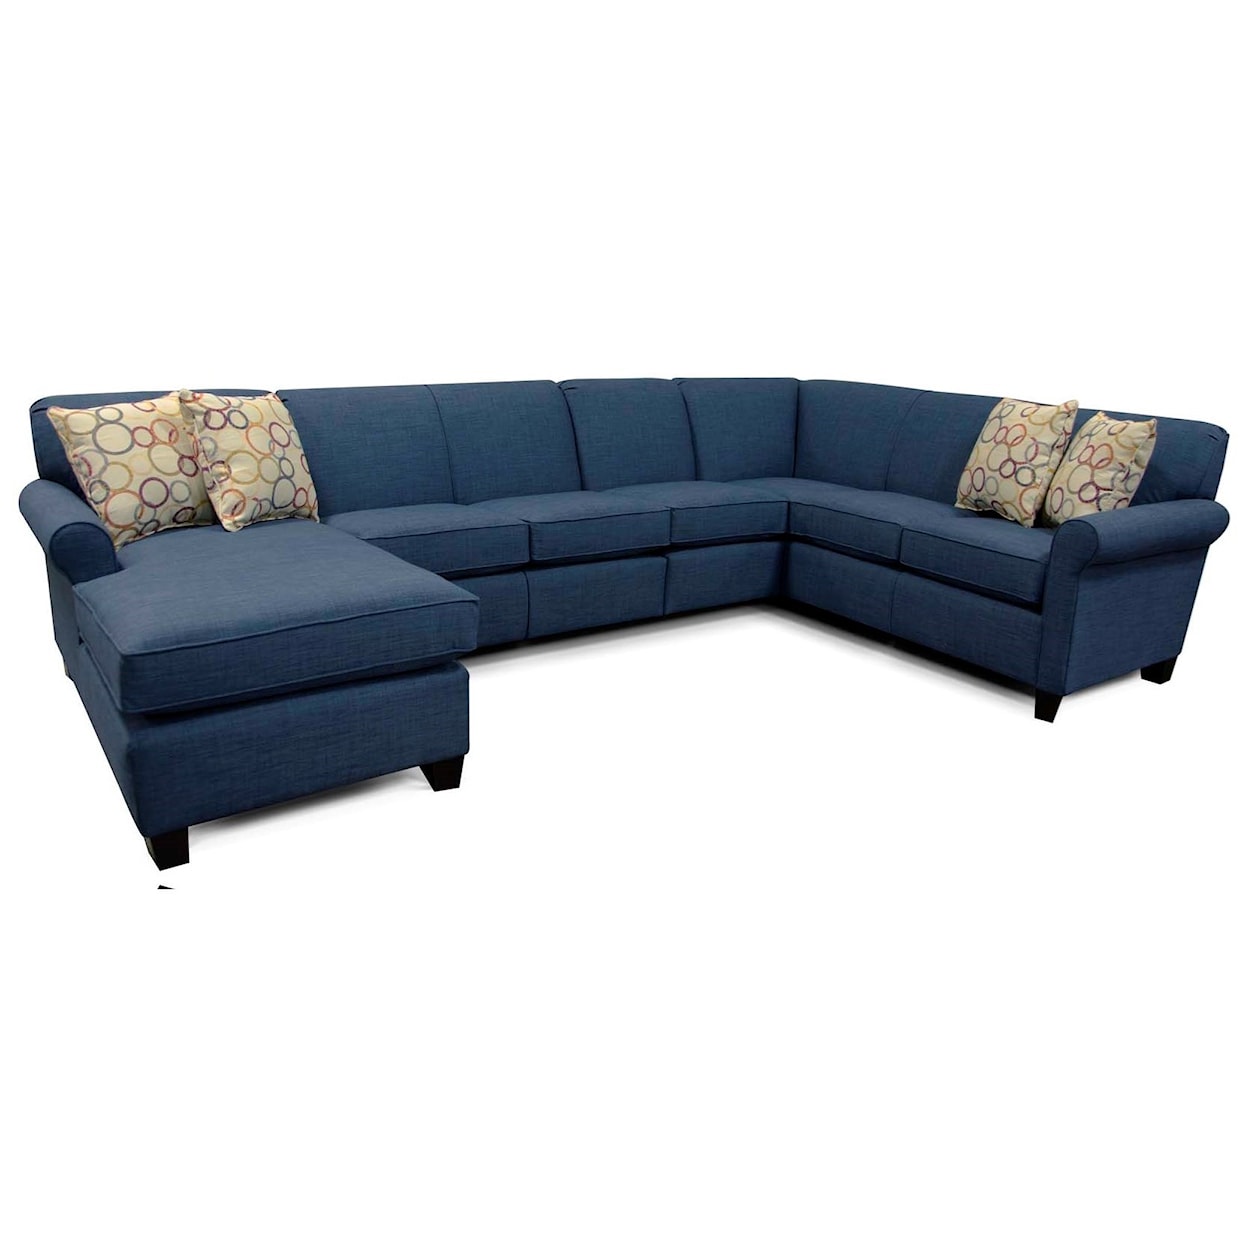 England 4630/LS Series Sectional Sofa with 6 Seats